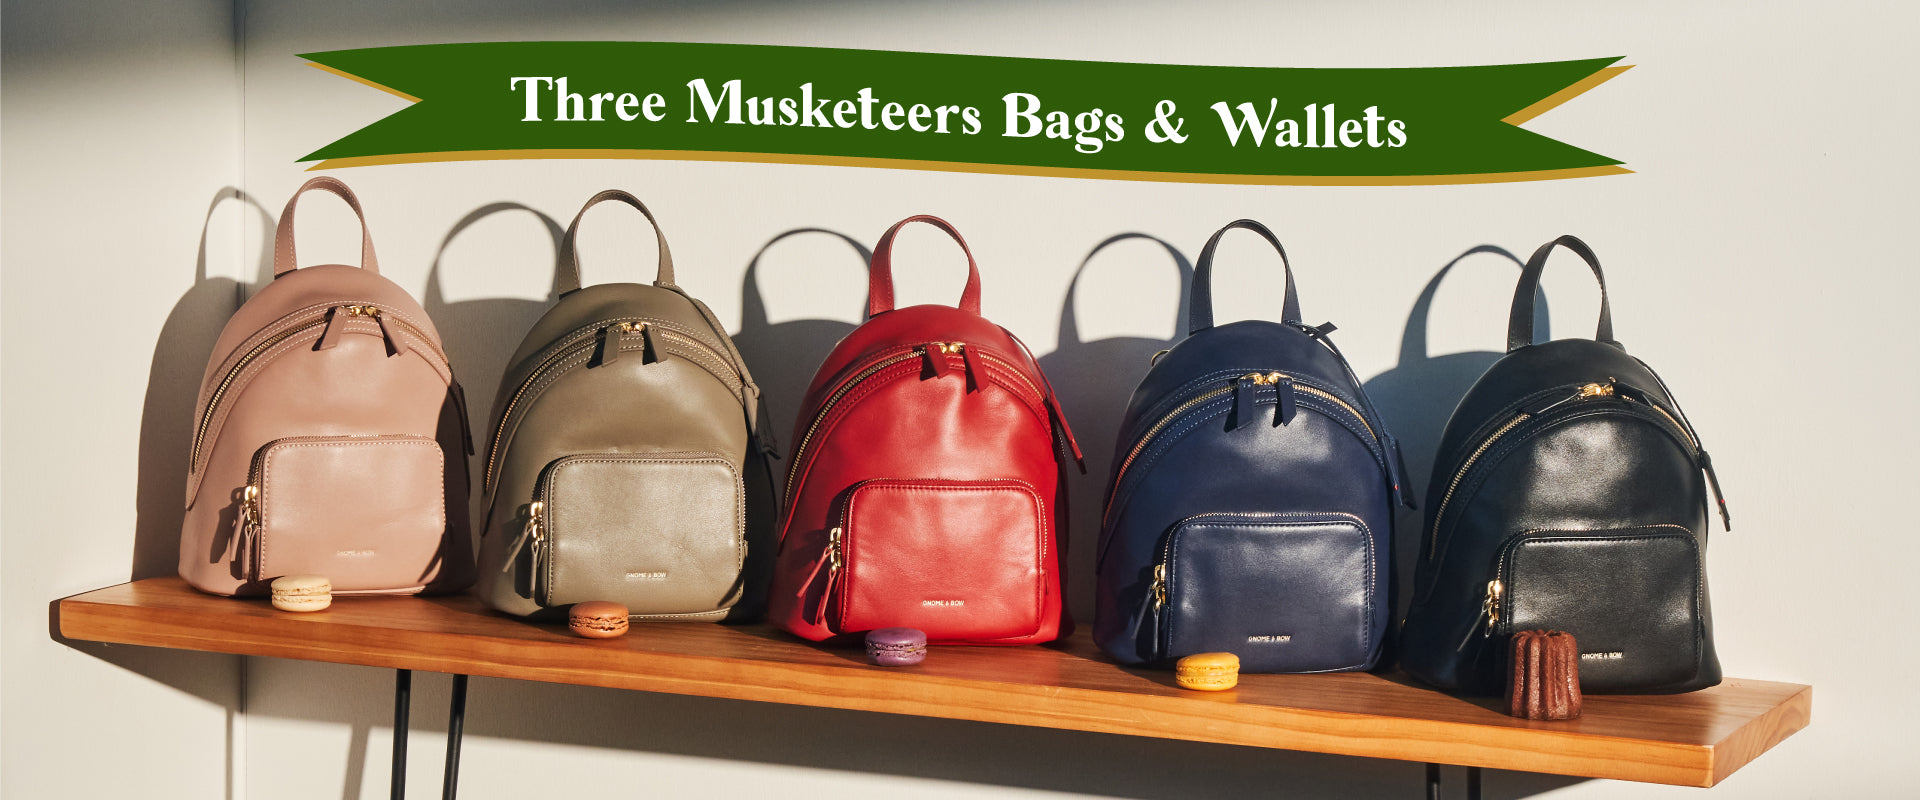 Three Musketeers Nappa USA Leather Bags